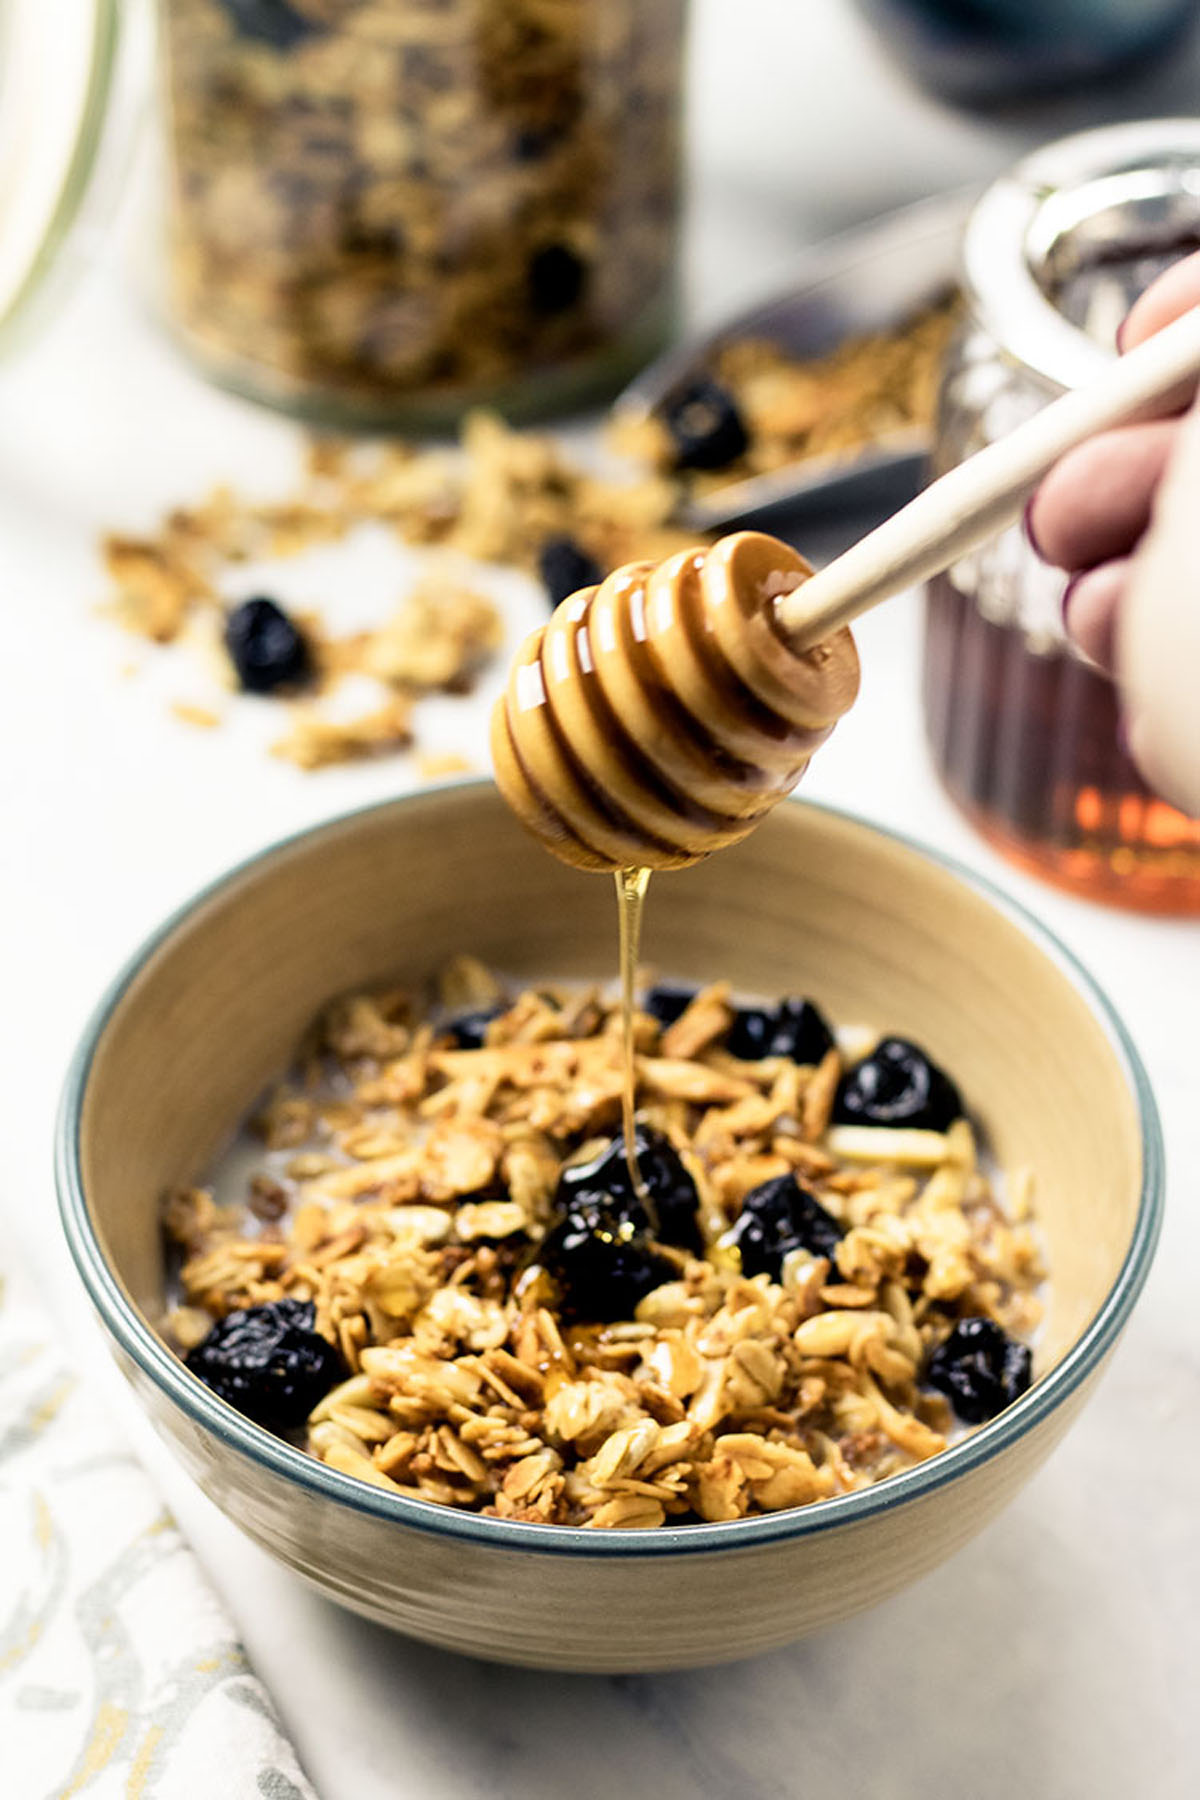 Honey being drizzled over a bowl of granola in milk